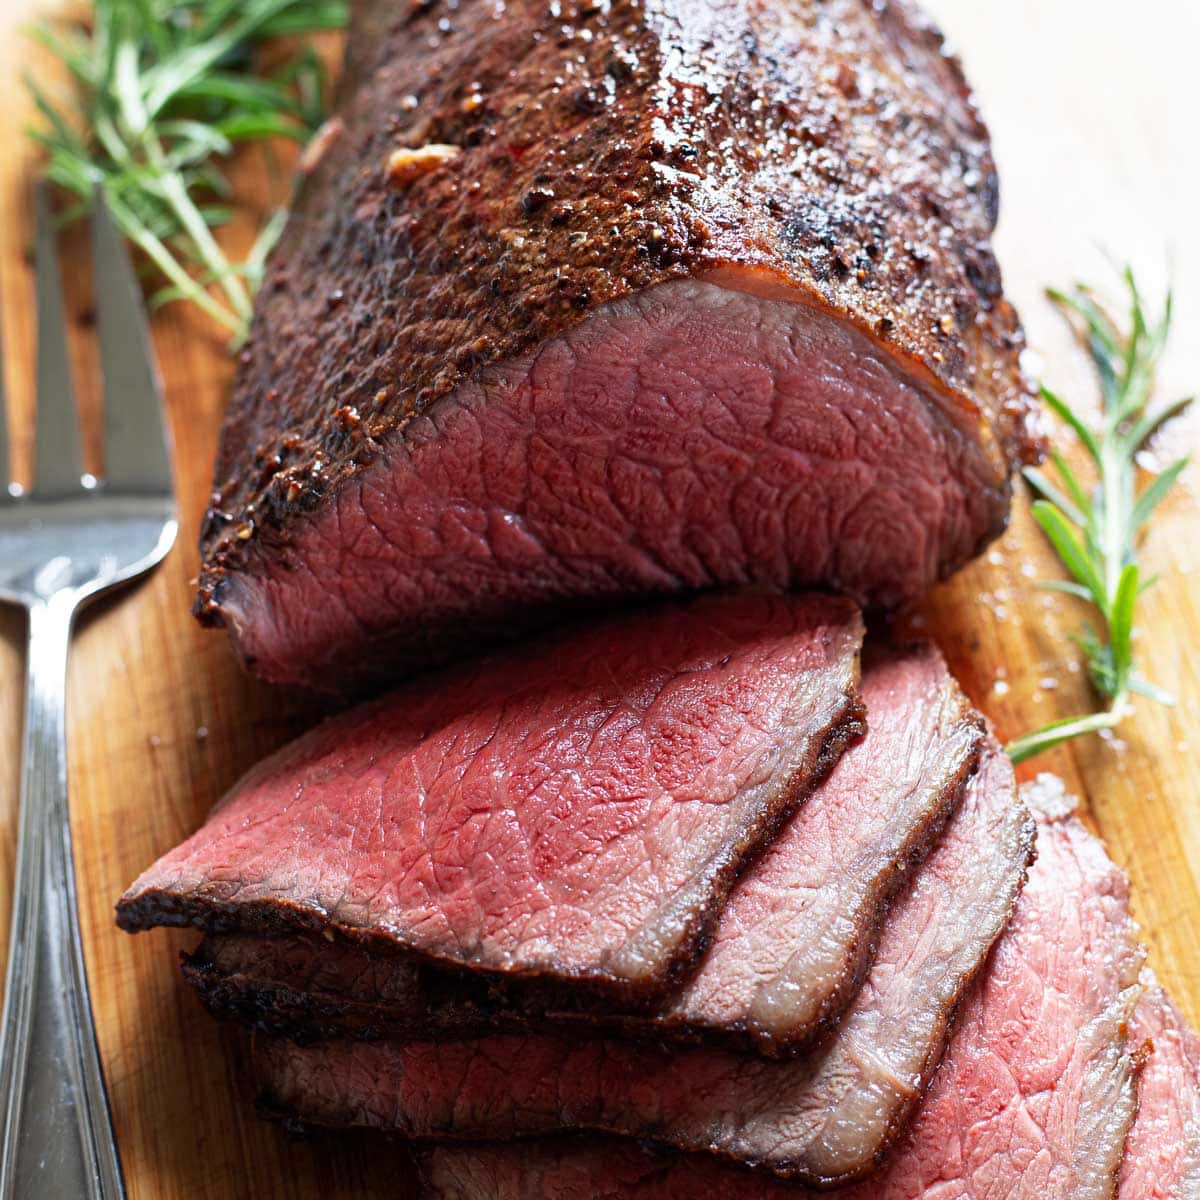 Rare roasted beef with a brown crust being sliced on a wooden cutting board.